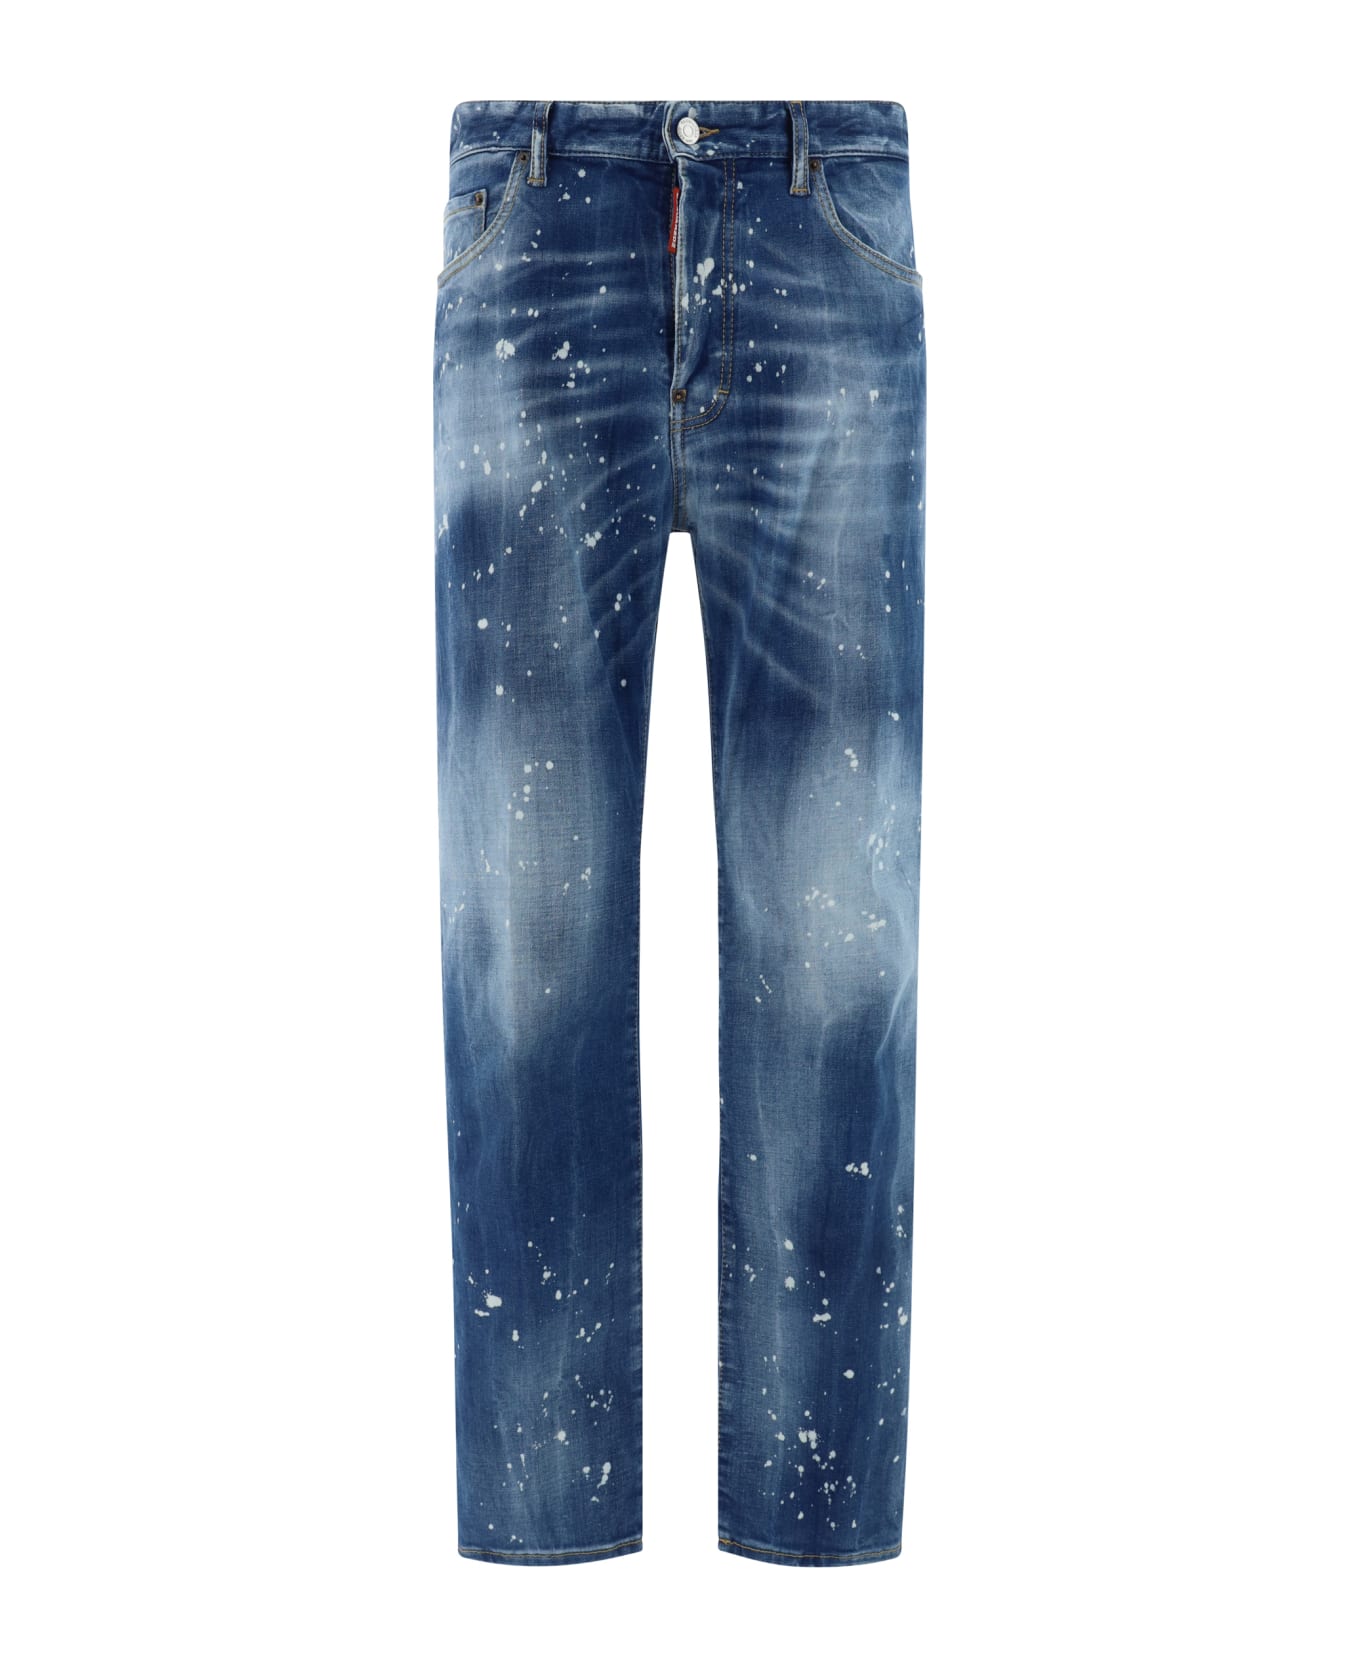 Dsquared2 Jeans - Navy Blue